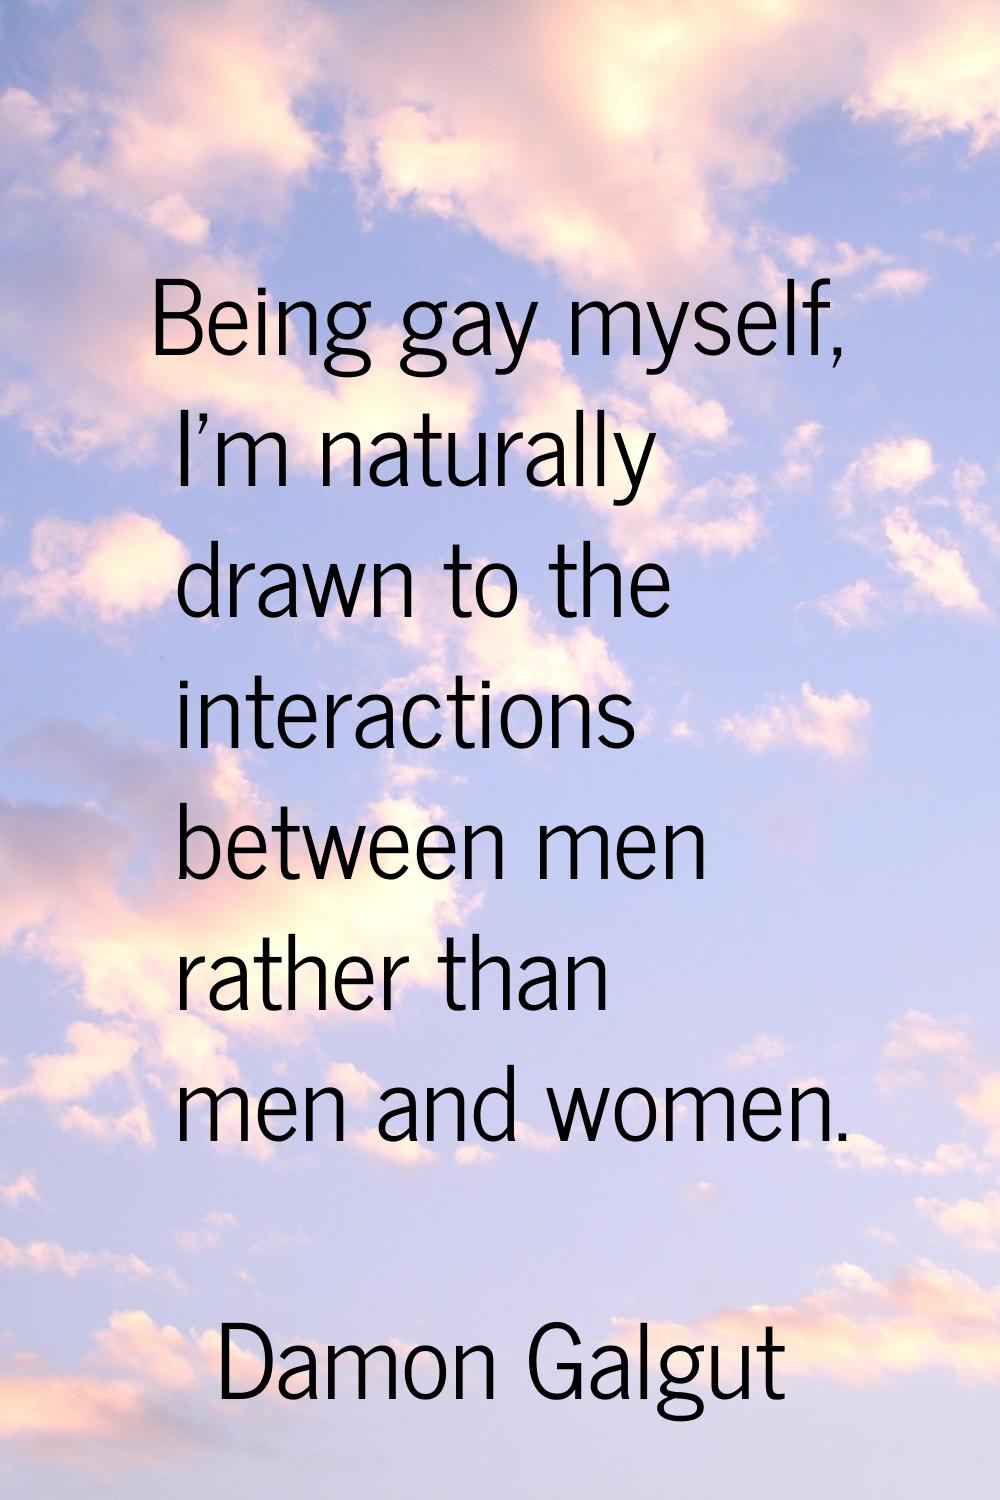 Being gay myself, I'm naturally drawn to the interactions between men rather than men and women.